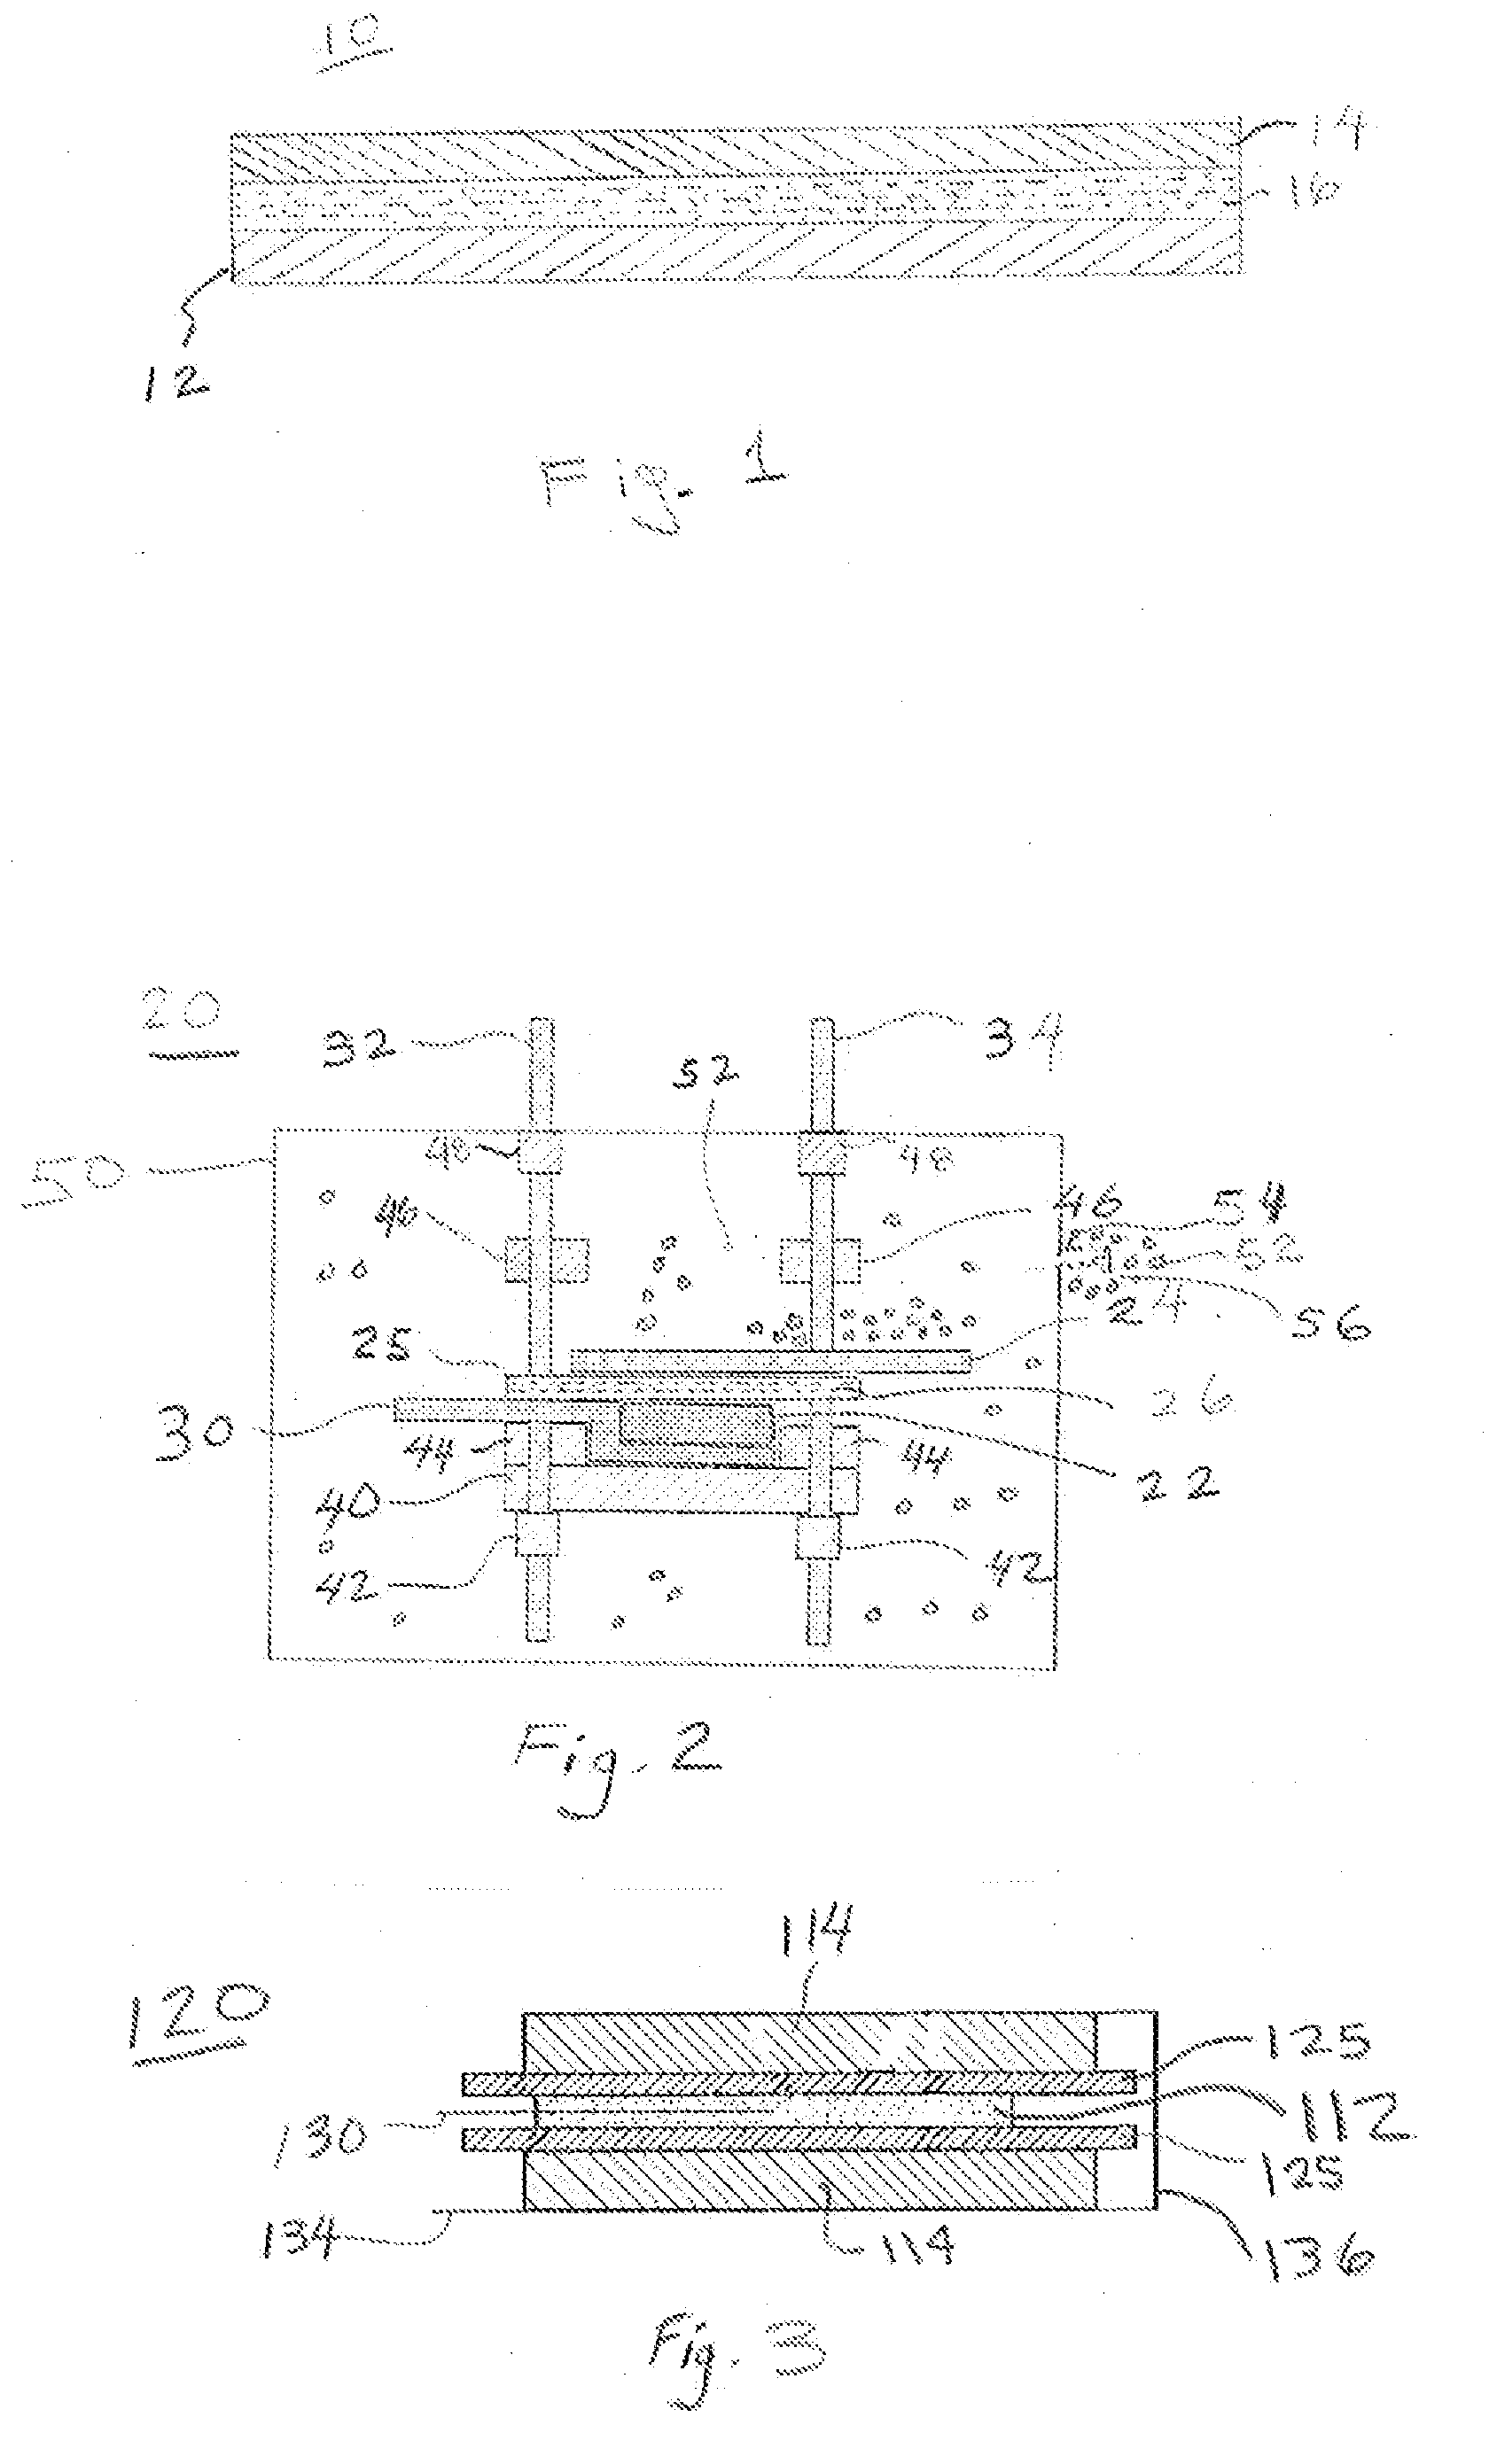 Rechargeable Lithium Air Battery Cell Having Electrolyte with Alkylene Additive